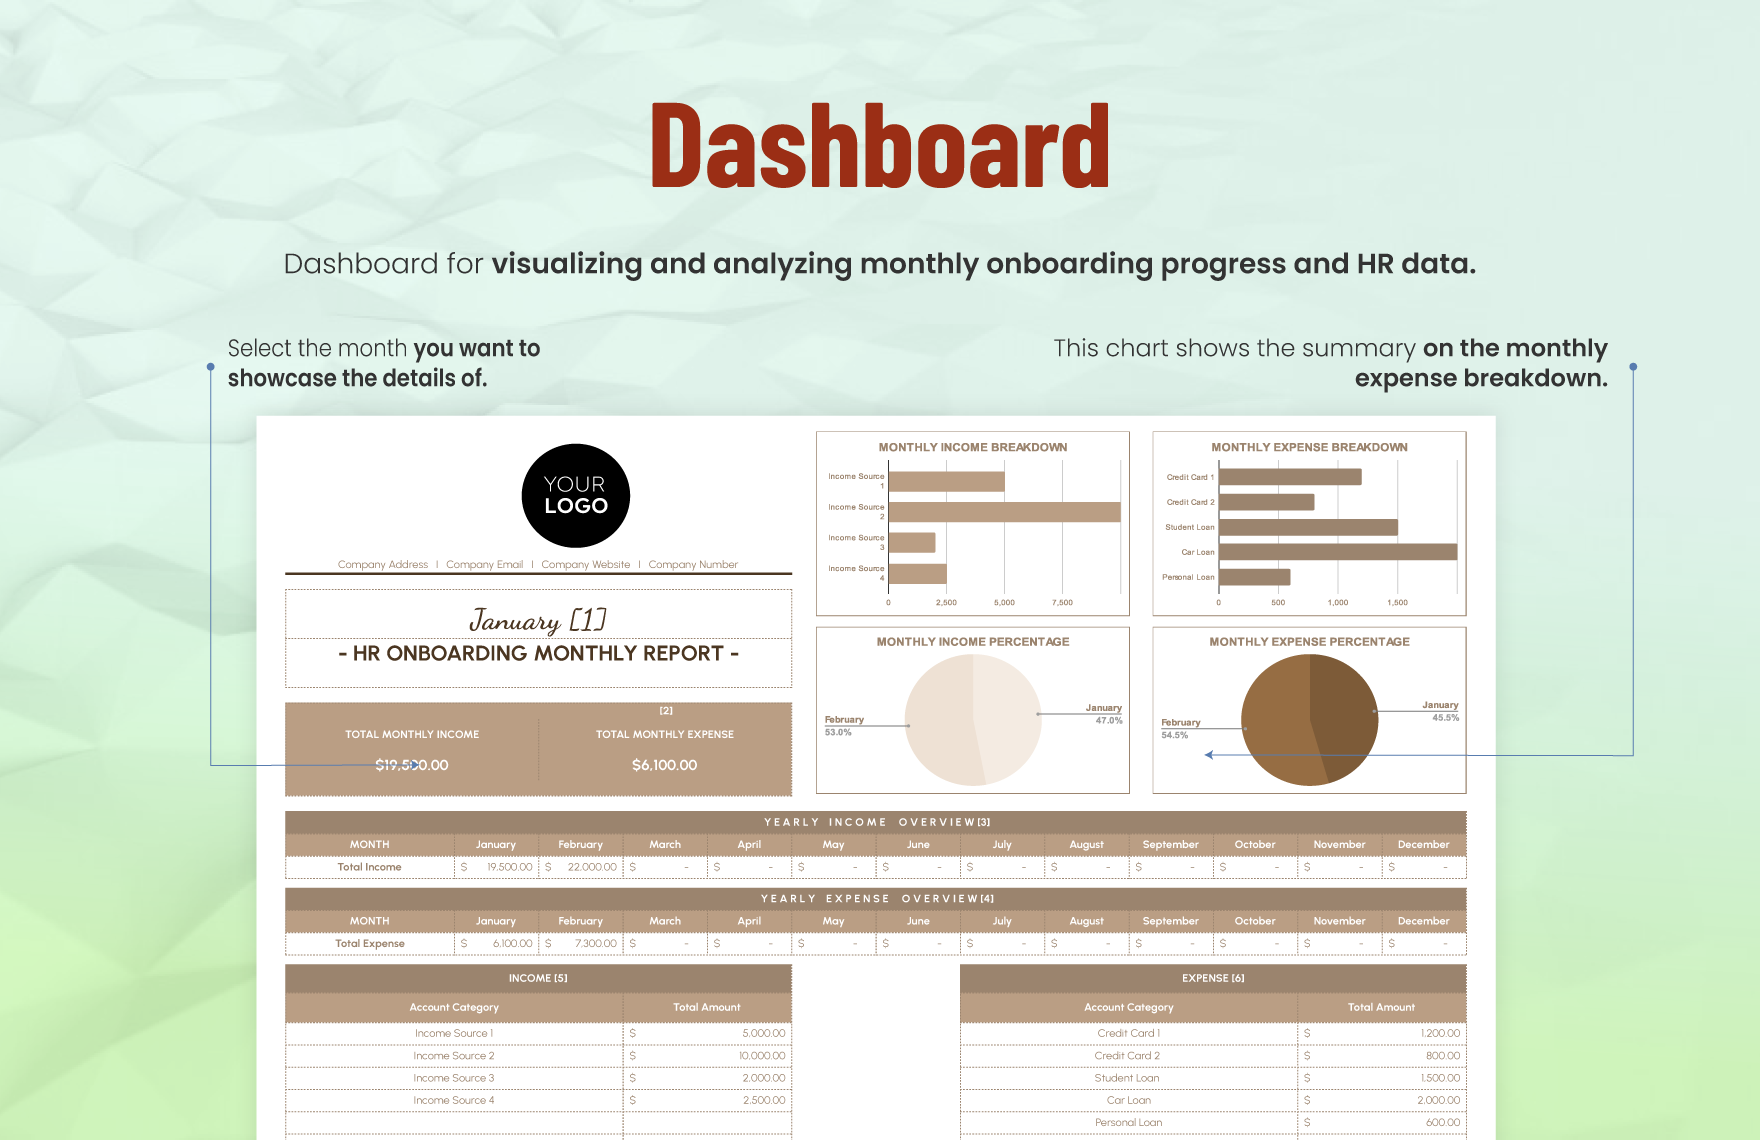 HR Onboarding Monthly Report Template